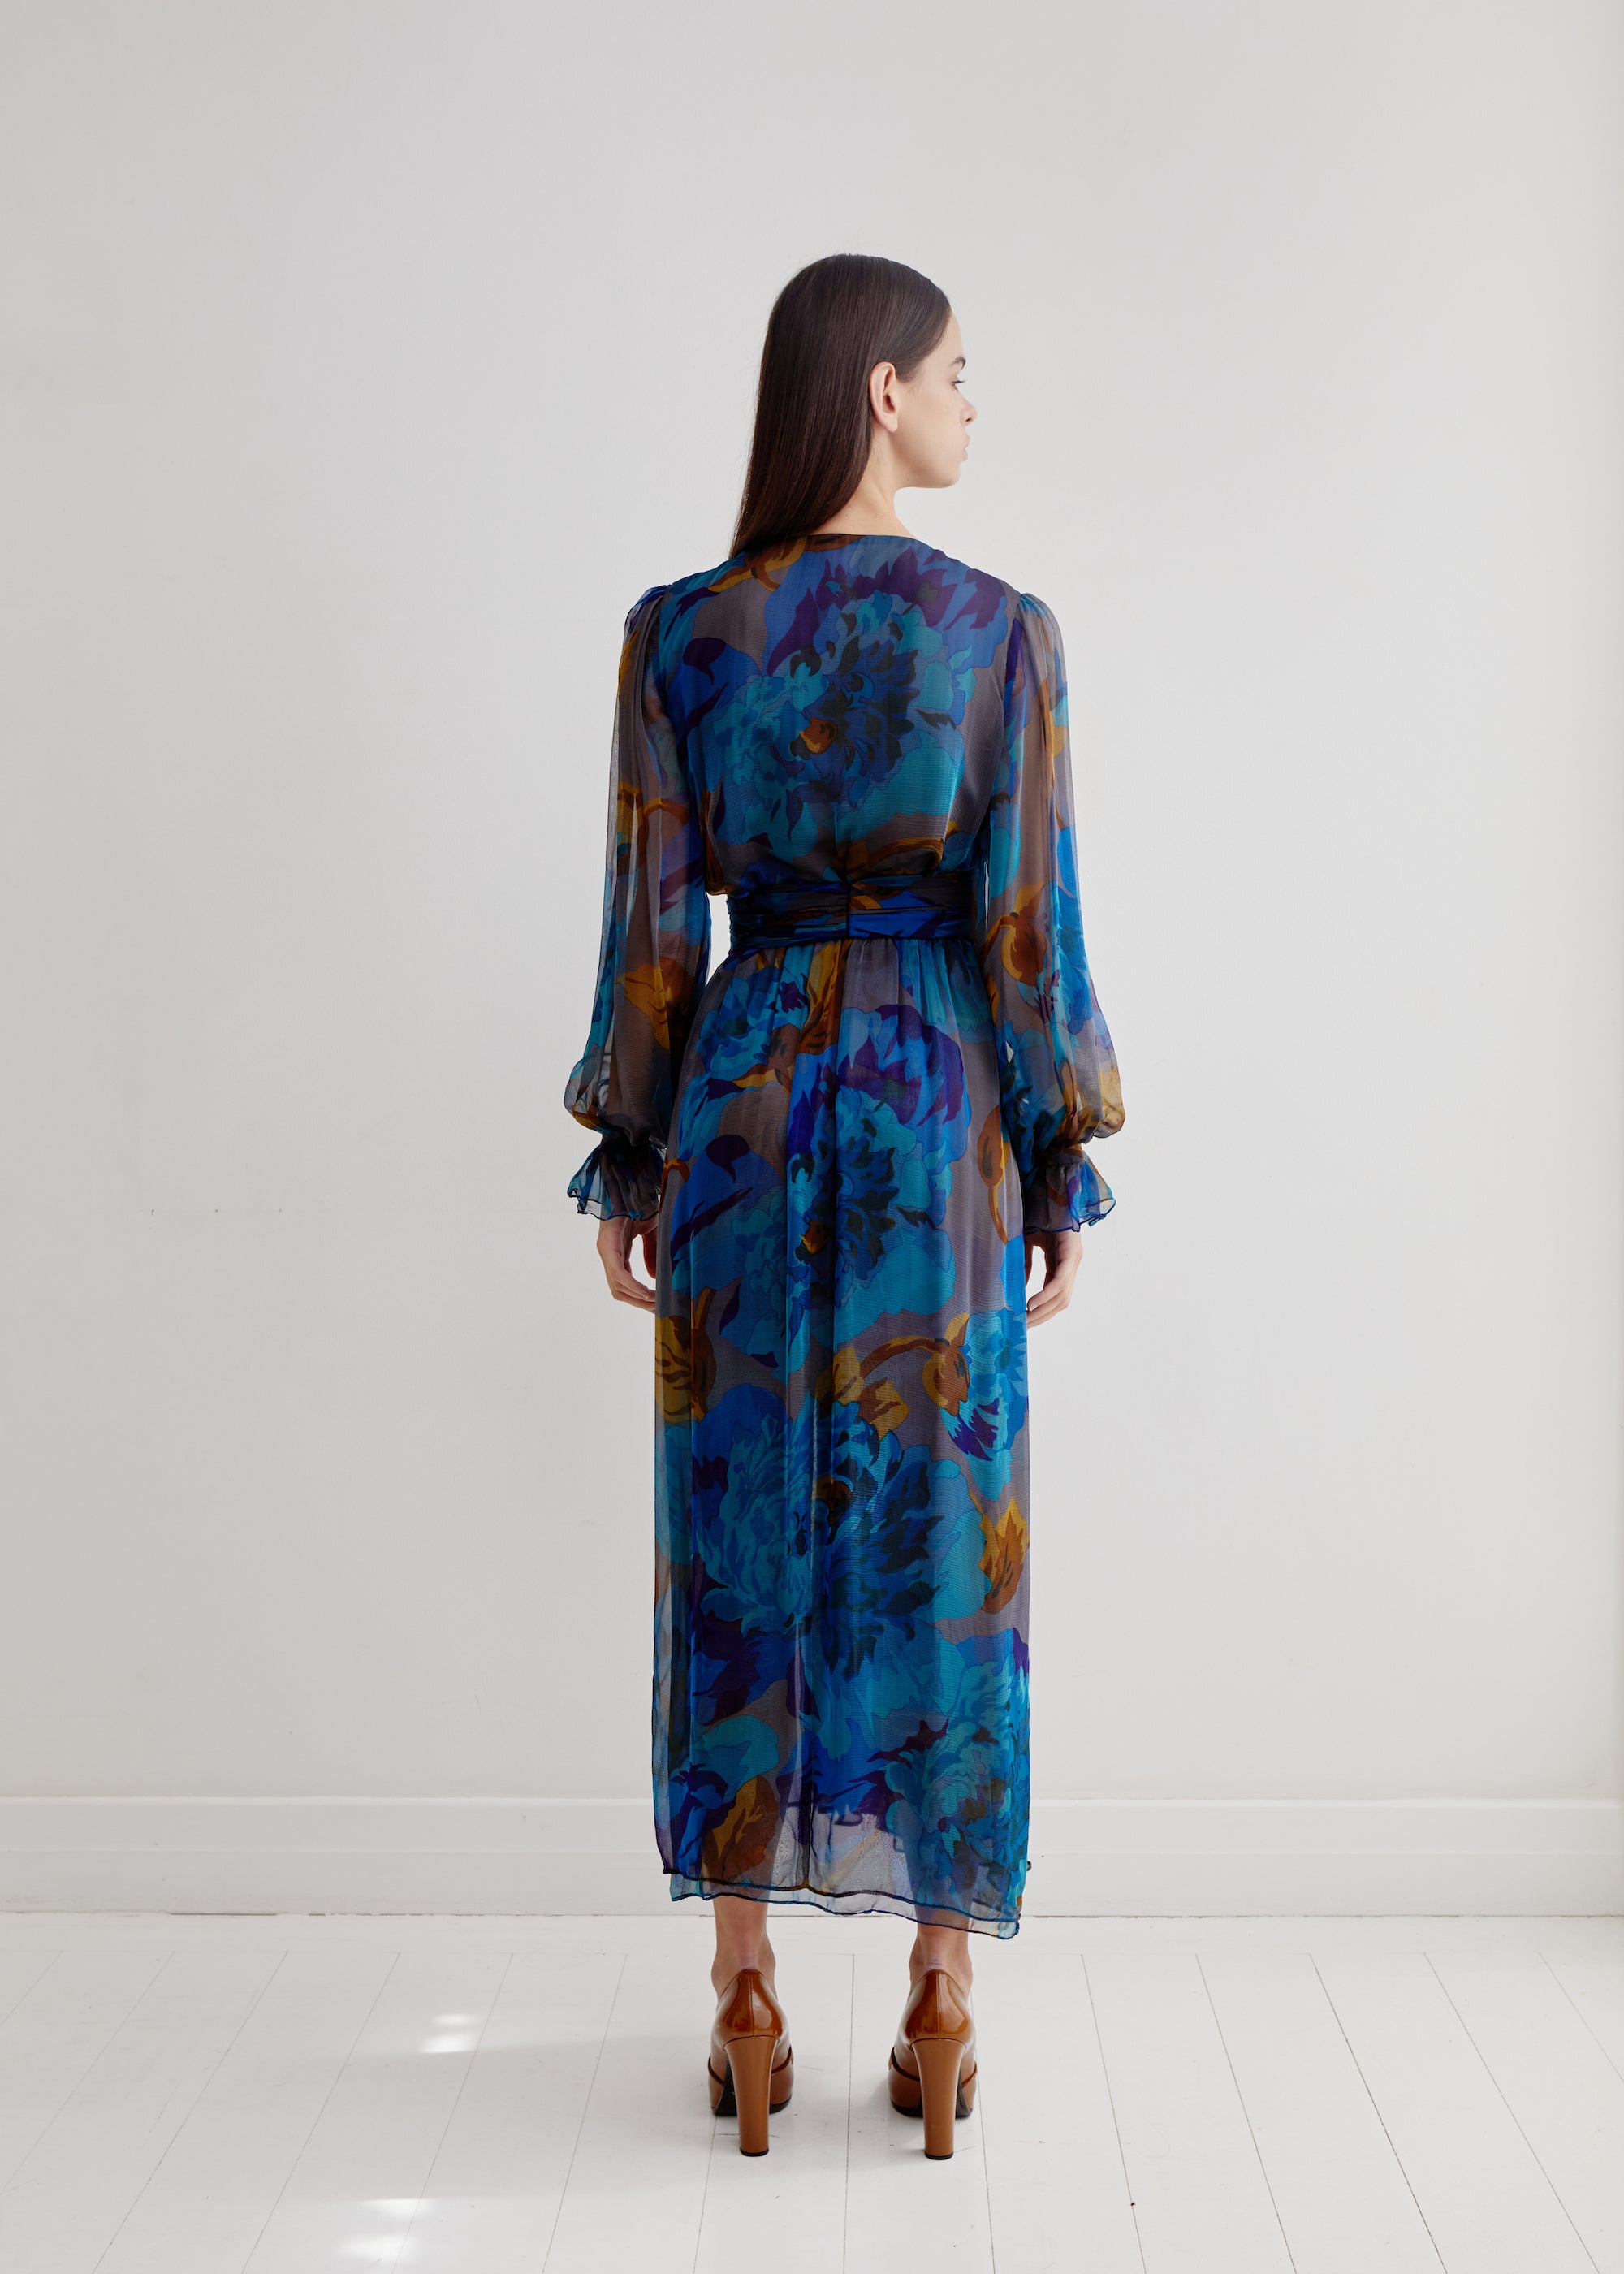 Givenchy <br> S/S 1978 Haute Couture silk chiffon floral print gown with plunging neckline